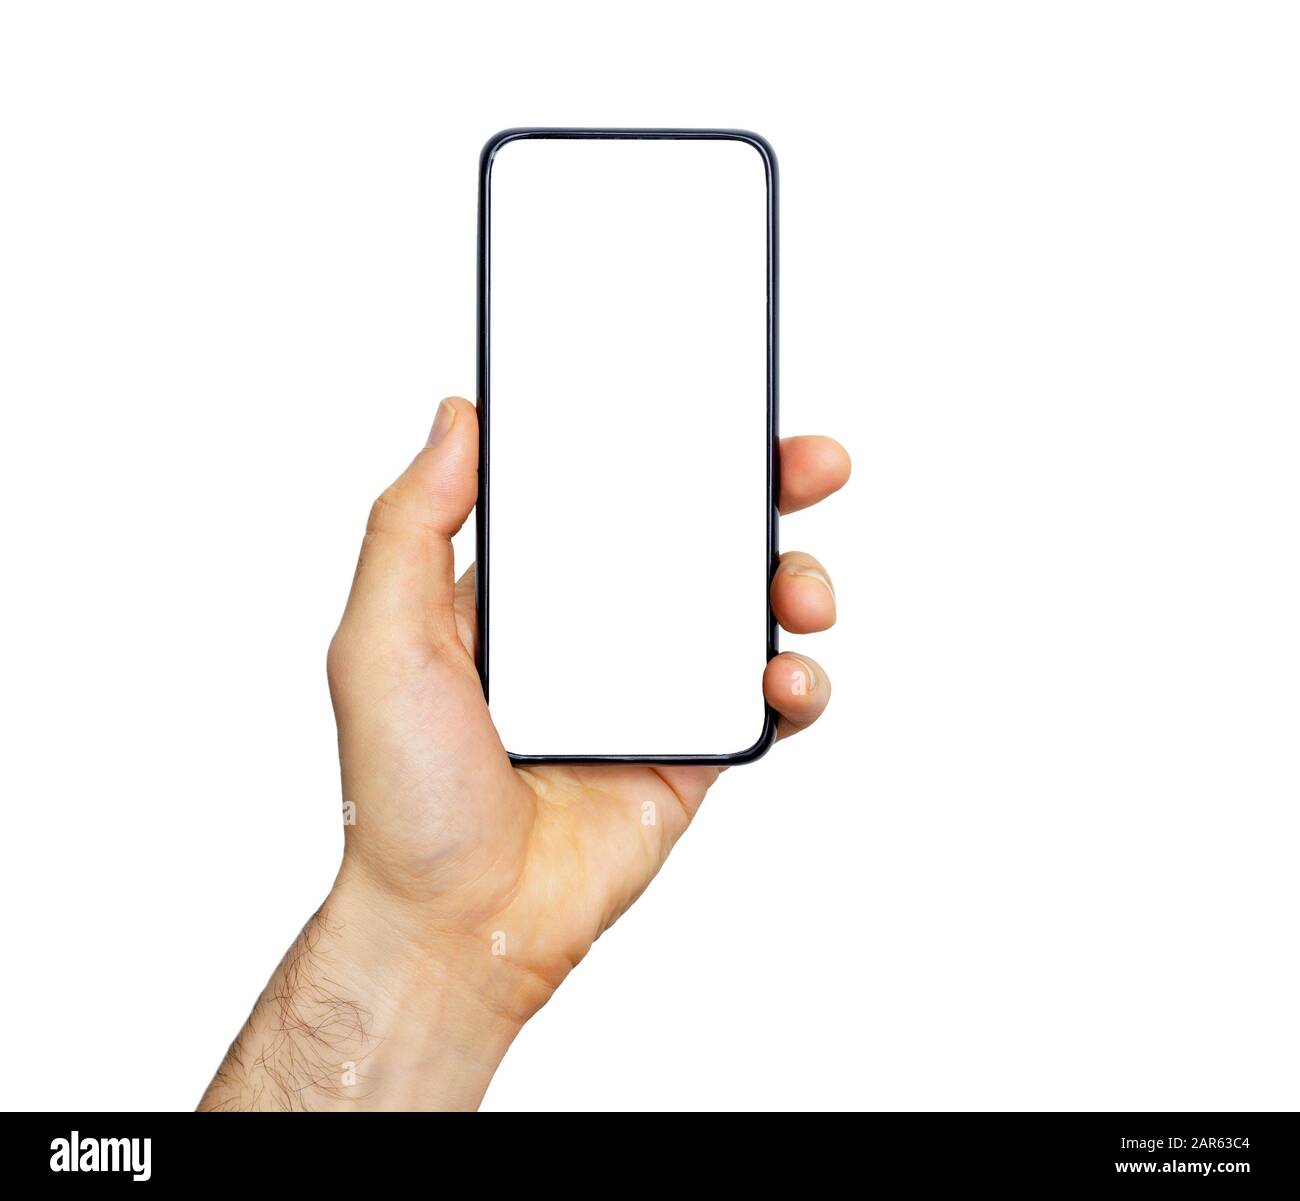 Smartphone (phone) empty screen in a hand. Black smartphone isolated on white background. Blank phone screen for image and design. Stock Photo